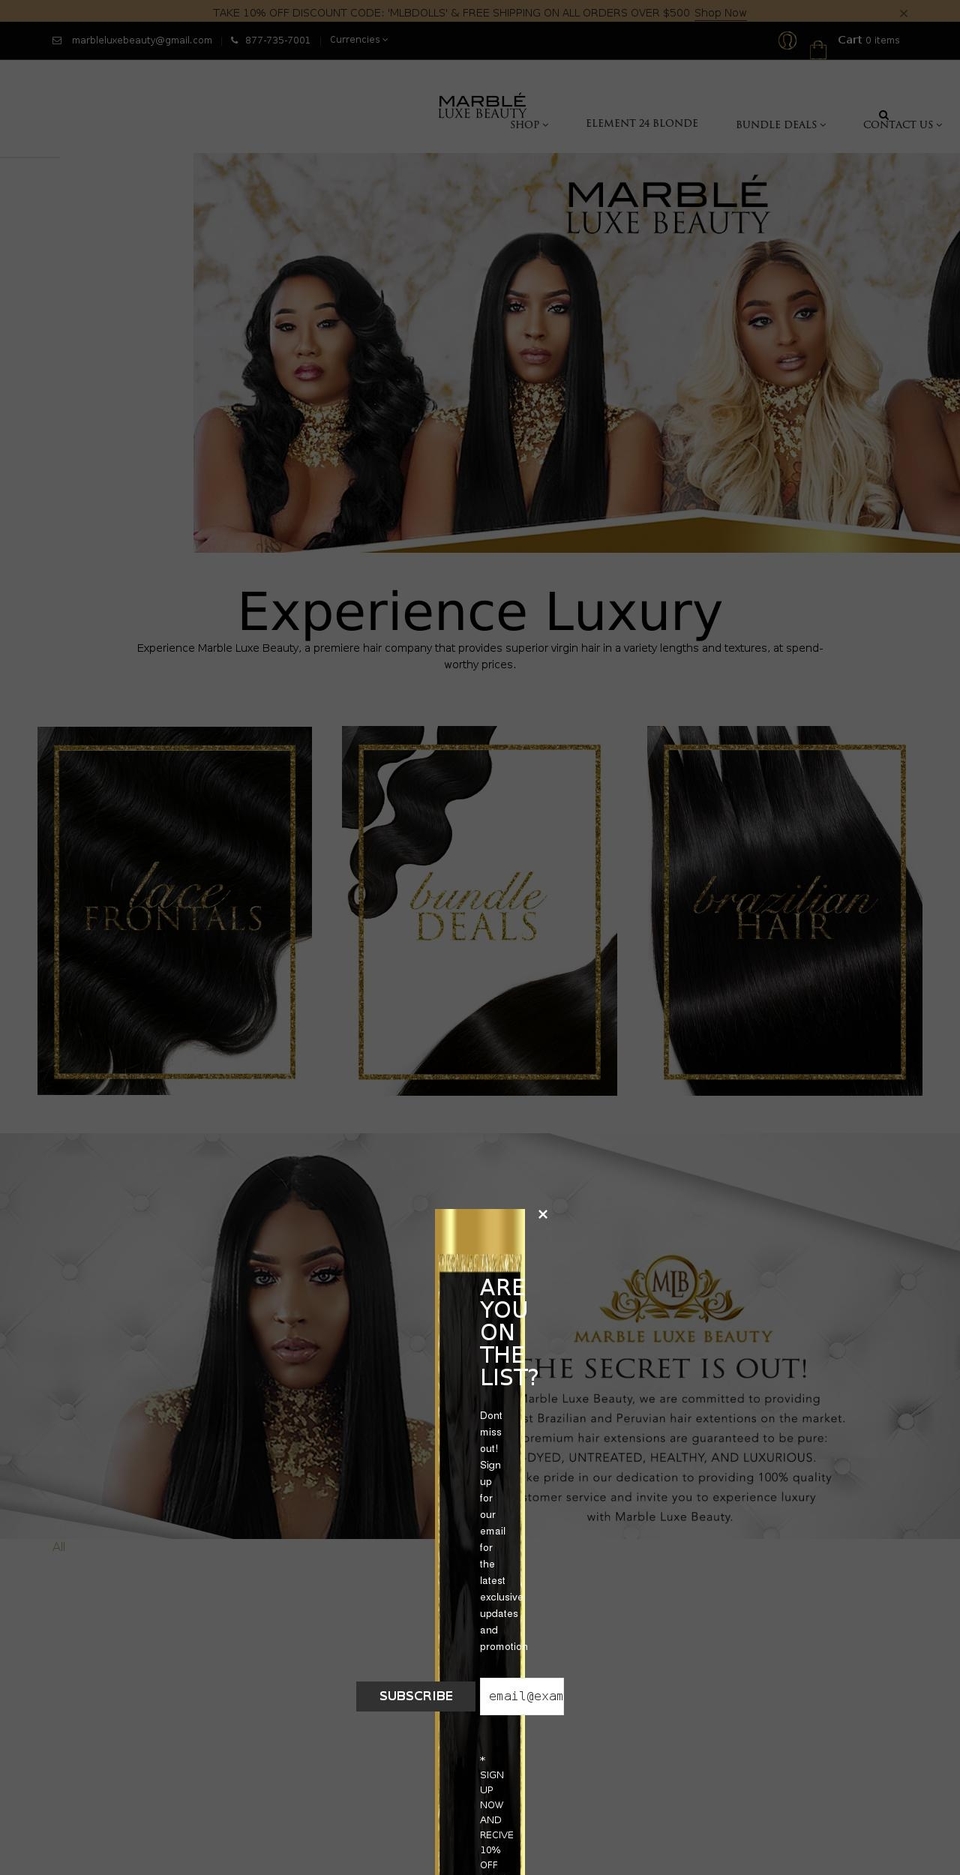 Marble Shopify theme site example marbleluxebeauty.com